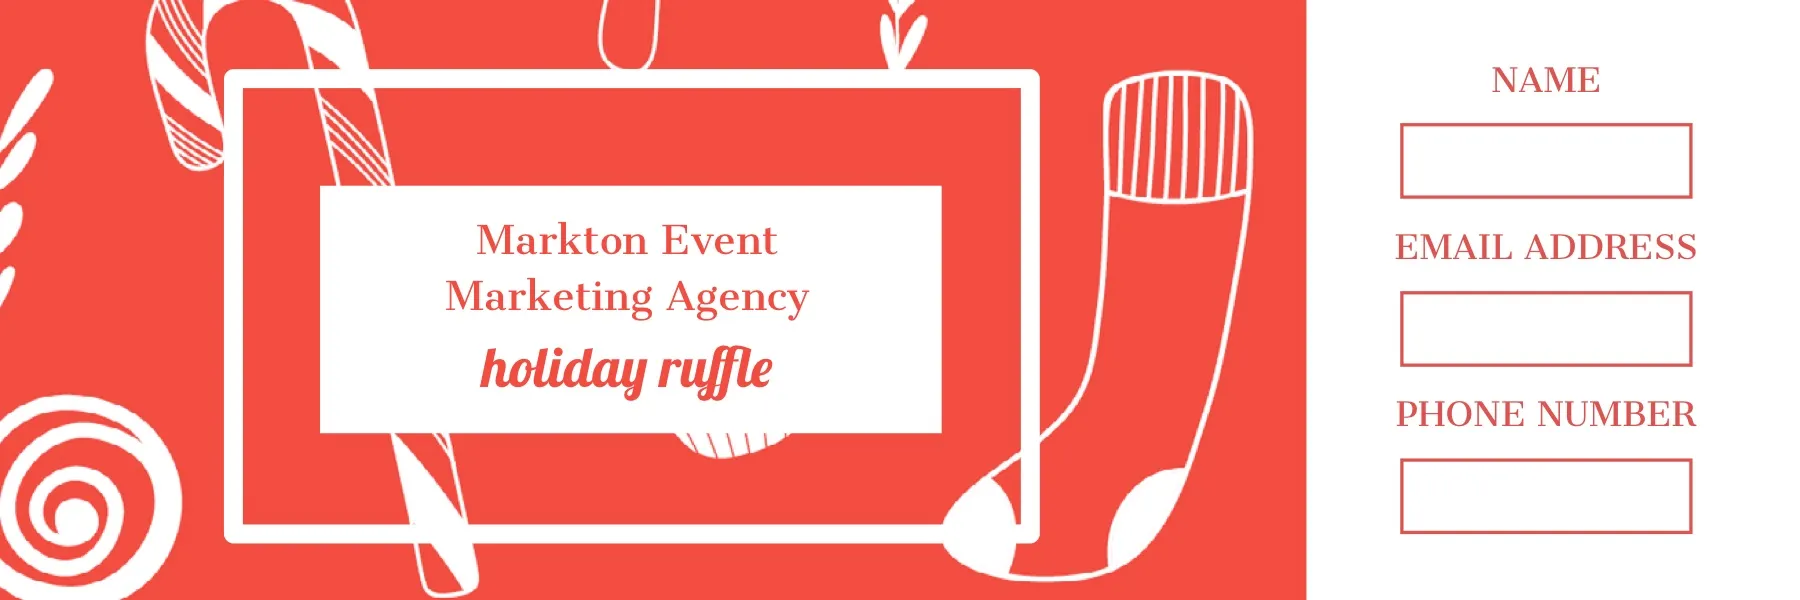 Red Illustrated Marketing Agency Christmas Event Raffle Ticket